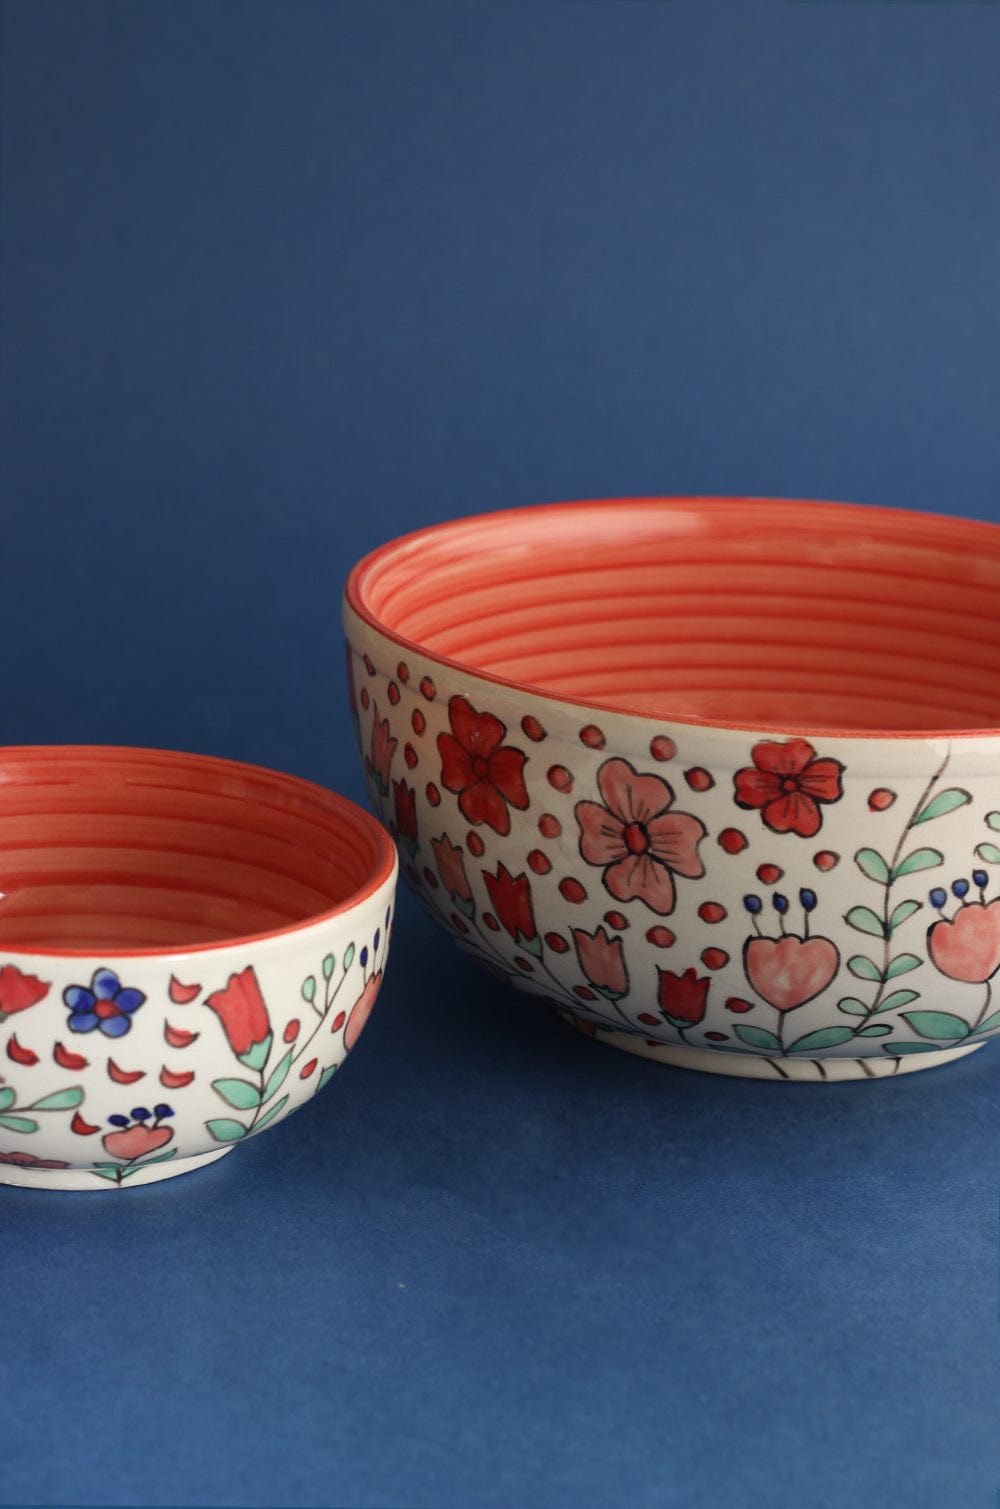 Flower Meadow BowlMaterial: Handpainted Handmade Stoneware
Dimensions: Large - 9.50 Dia x 5 H Inch, Small - 6 Dia x 3.50 H Inch

Handle with care. May Chip or Break on Impact. MicrowaFlower Meadow BowlThe Wishing Chair